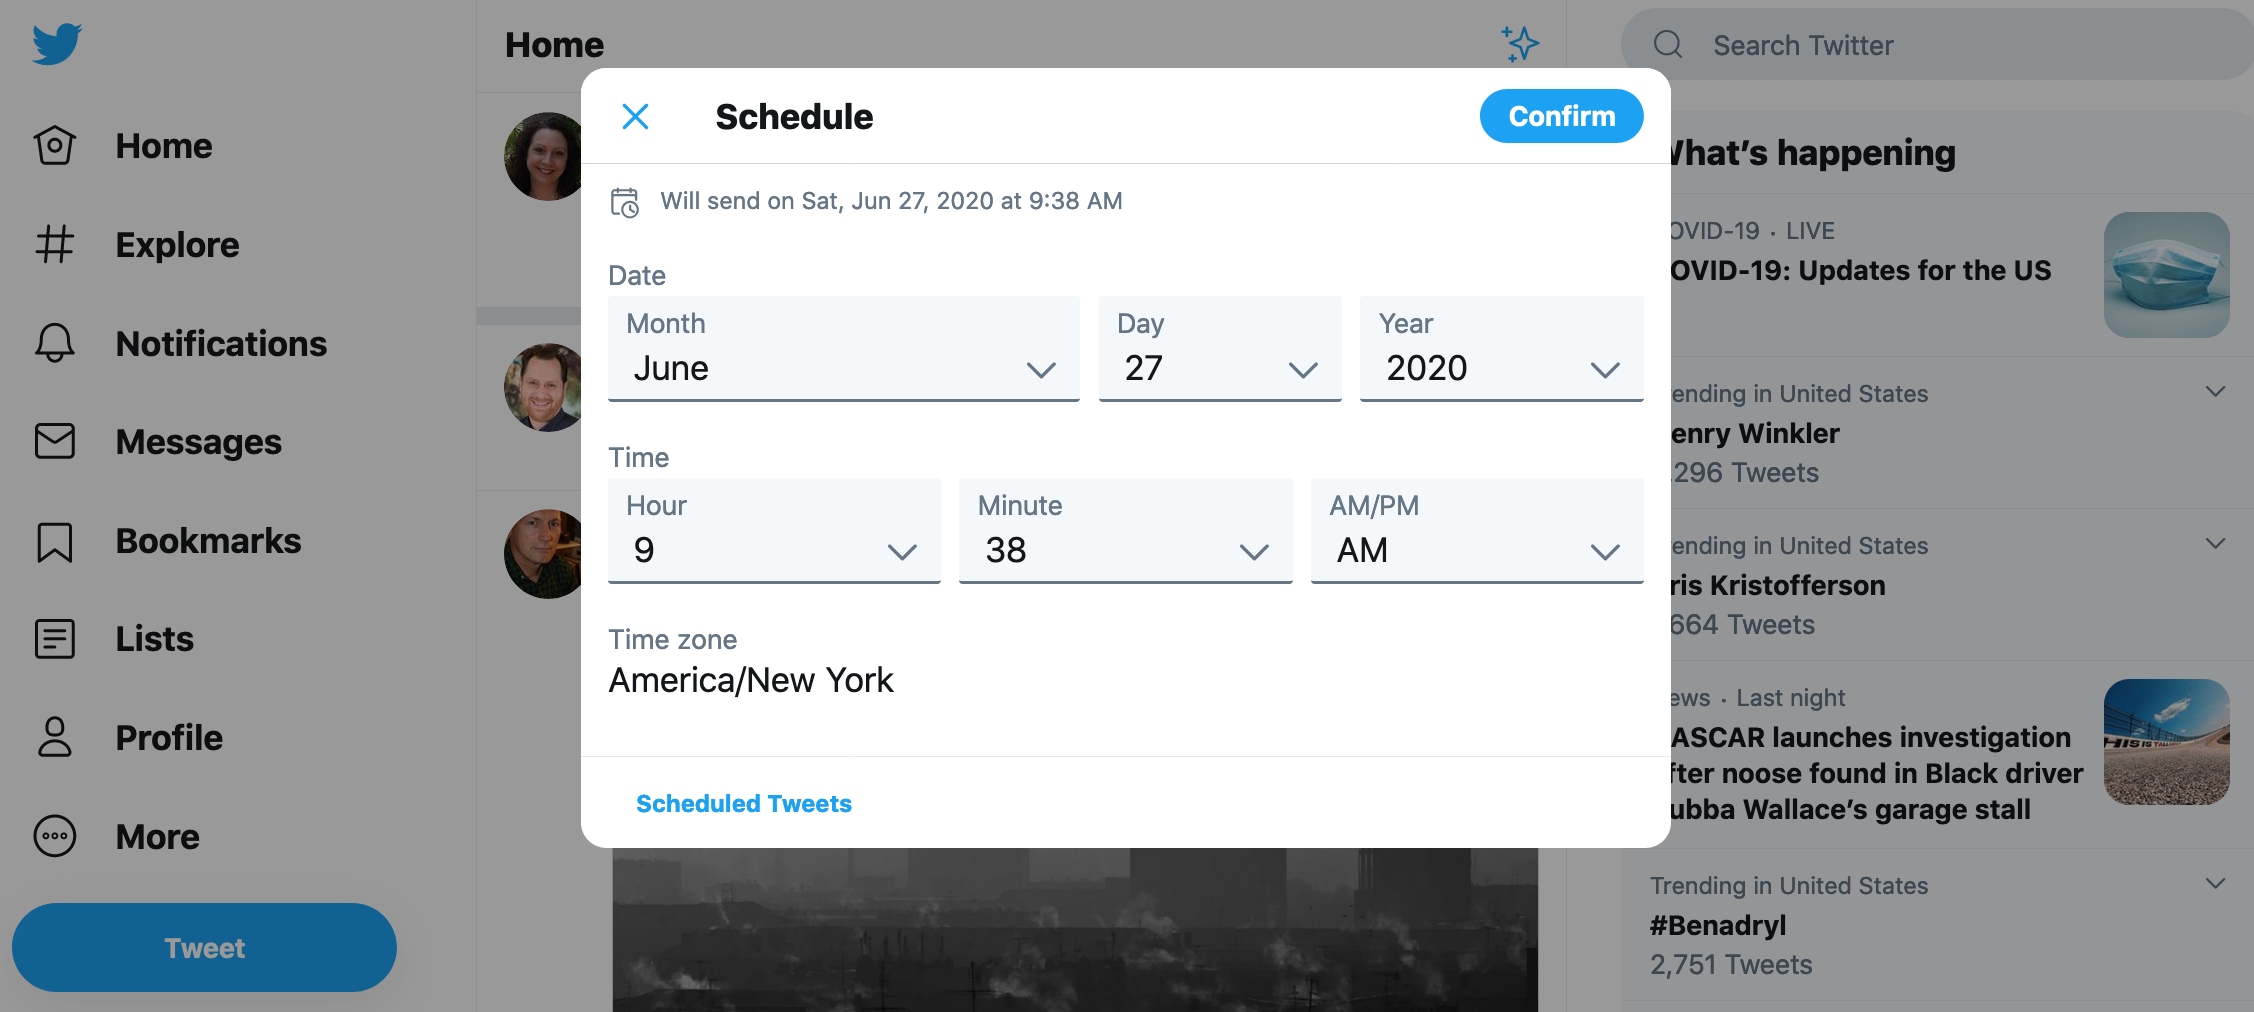 How to schedule a tweet on Twitter - web